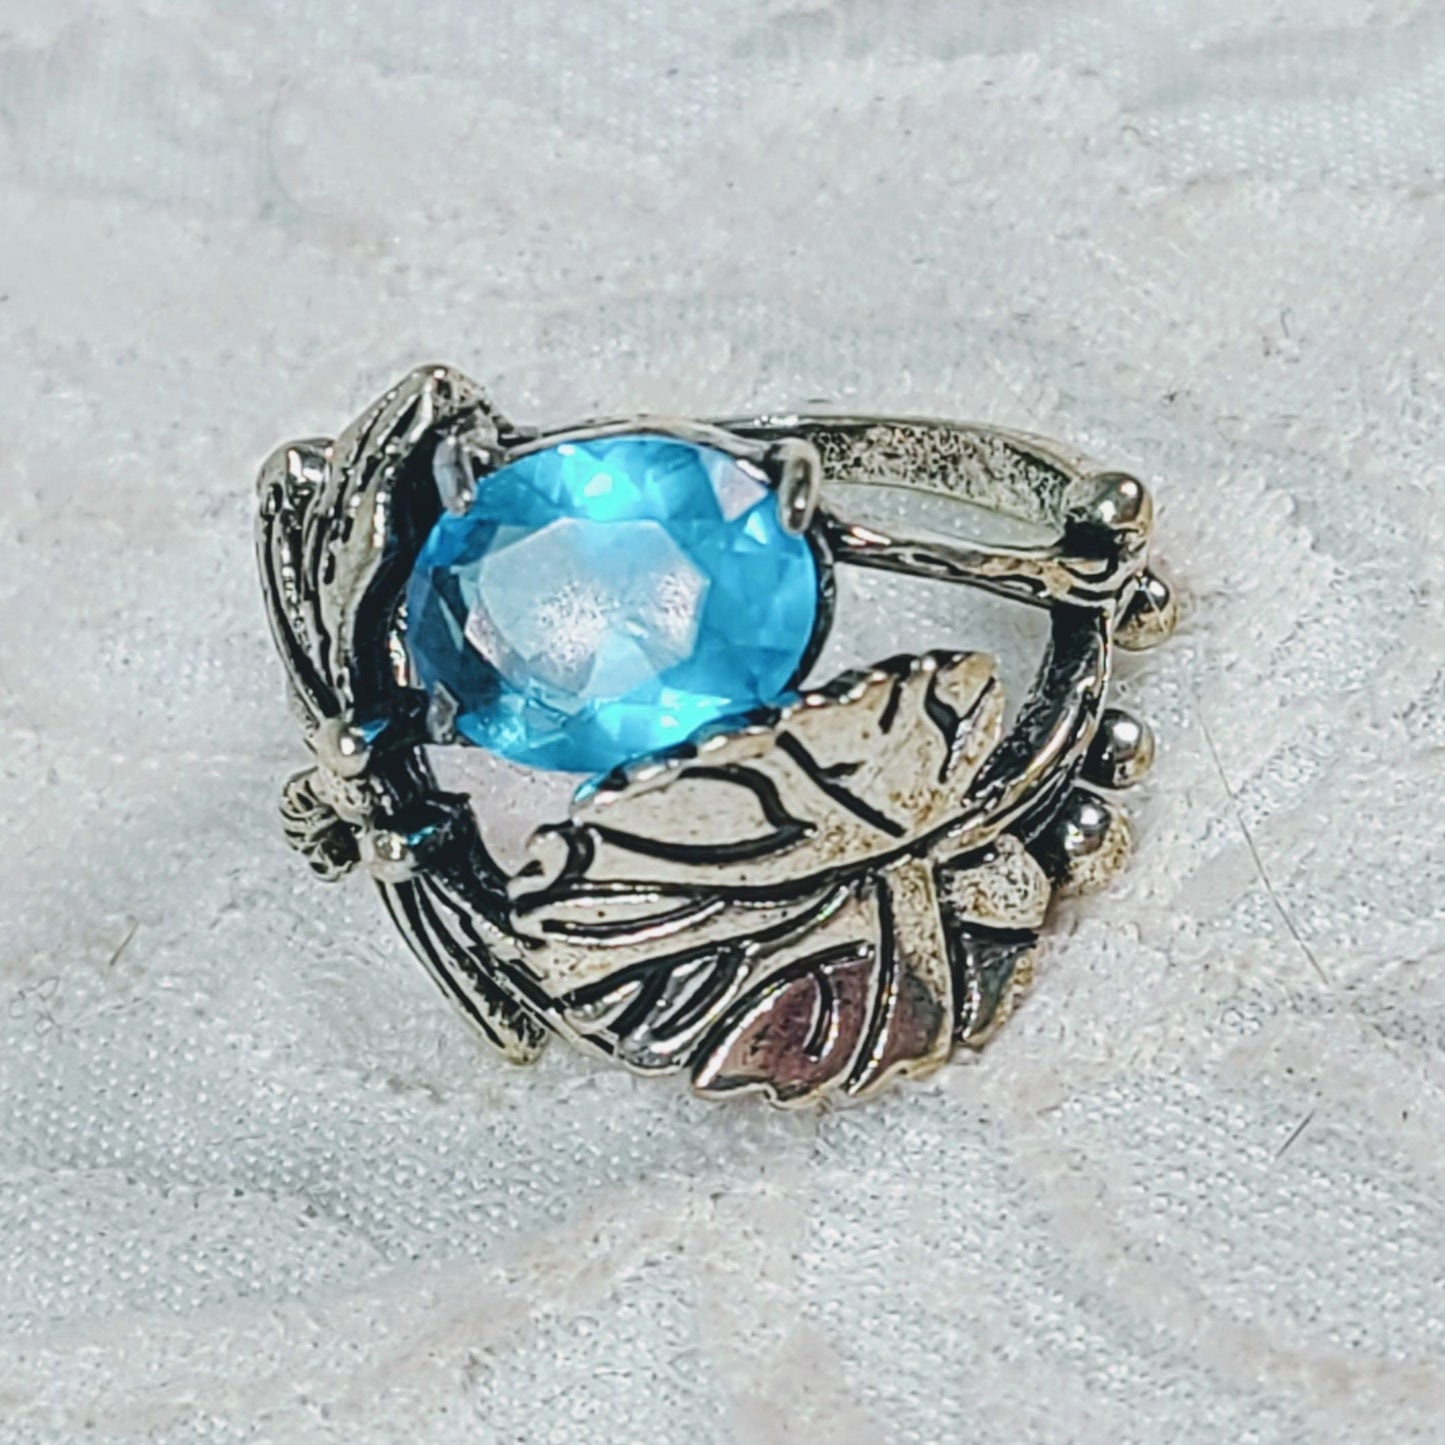 RING Silver Dragonfly Aquamarine Enchanted Fae Faerie Magick Ring RESTOCKED Witchcraft Sidhe Creativity Dreams